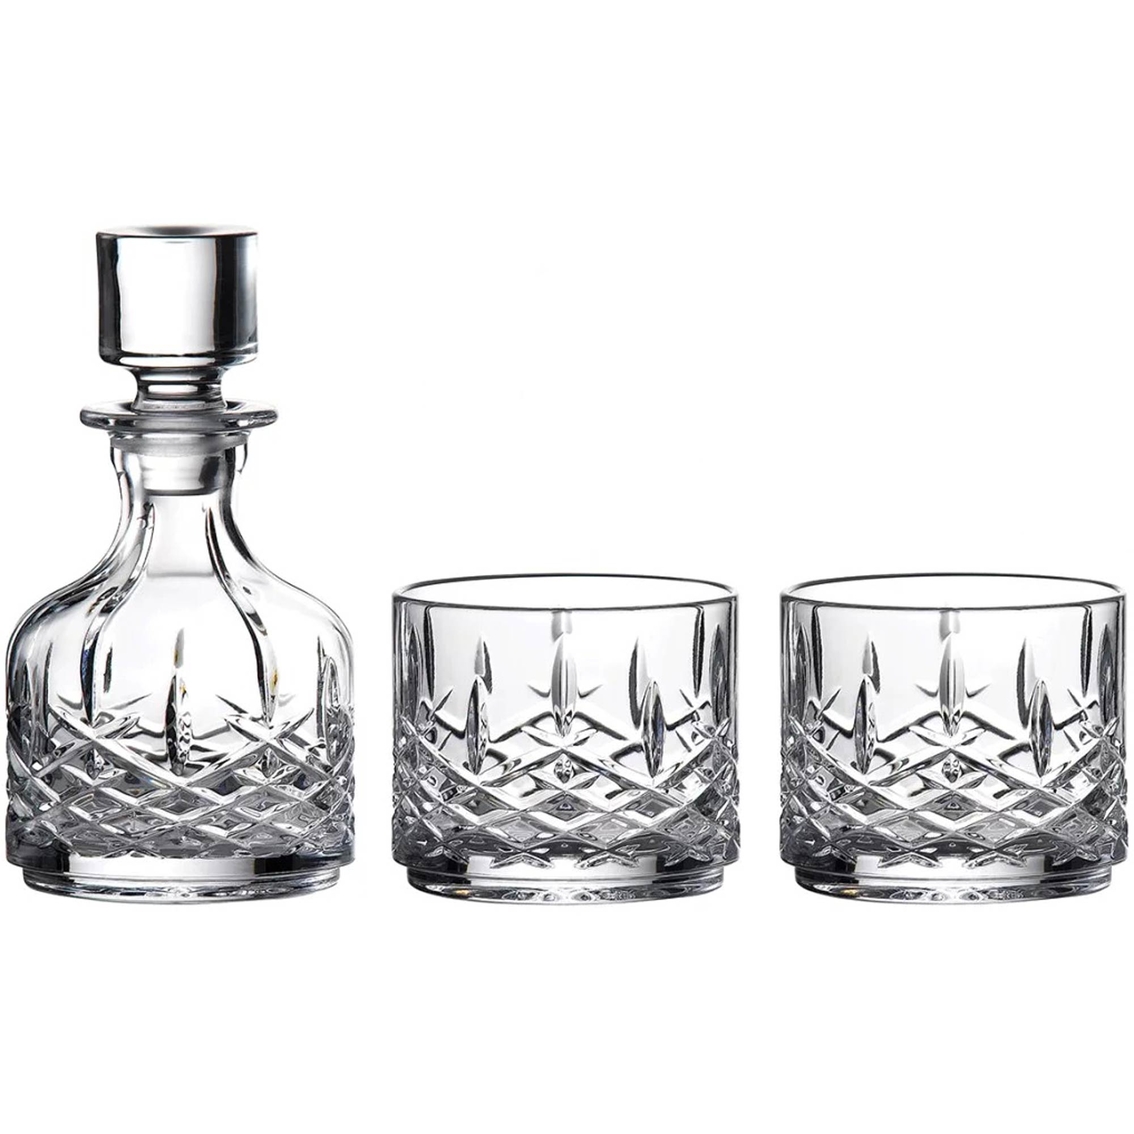 Marquis by Waterford Markham Stacking Decanter and Tumbler 3 pc. Set - Image 1 of 2